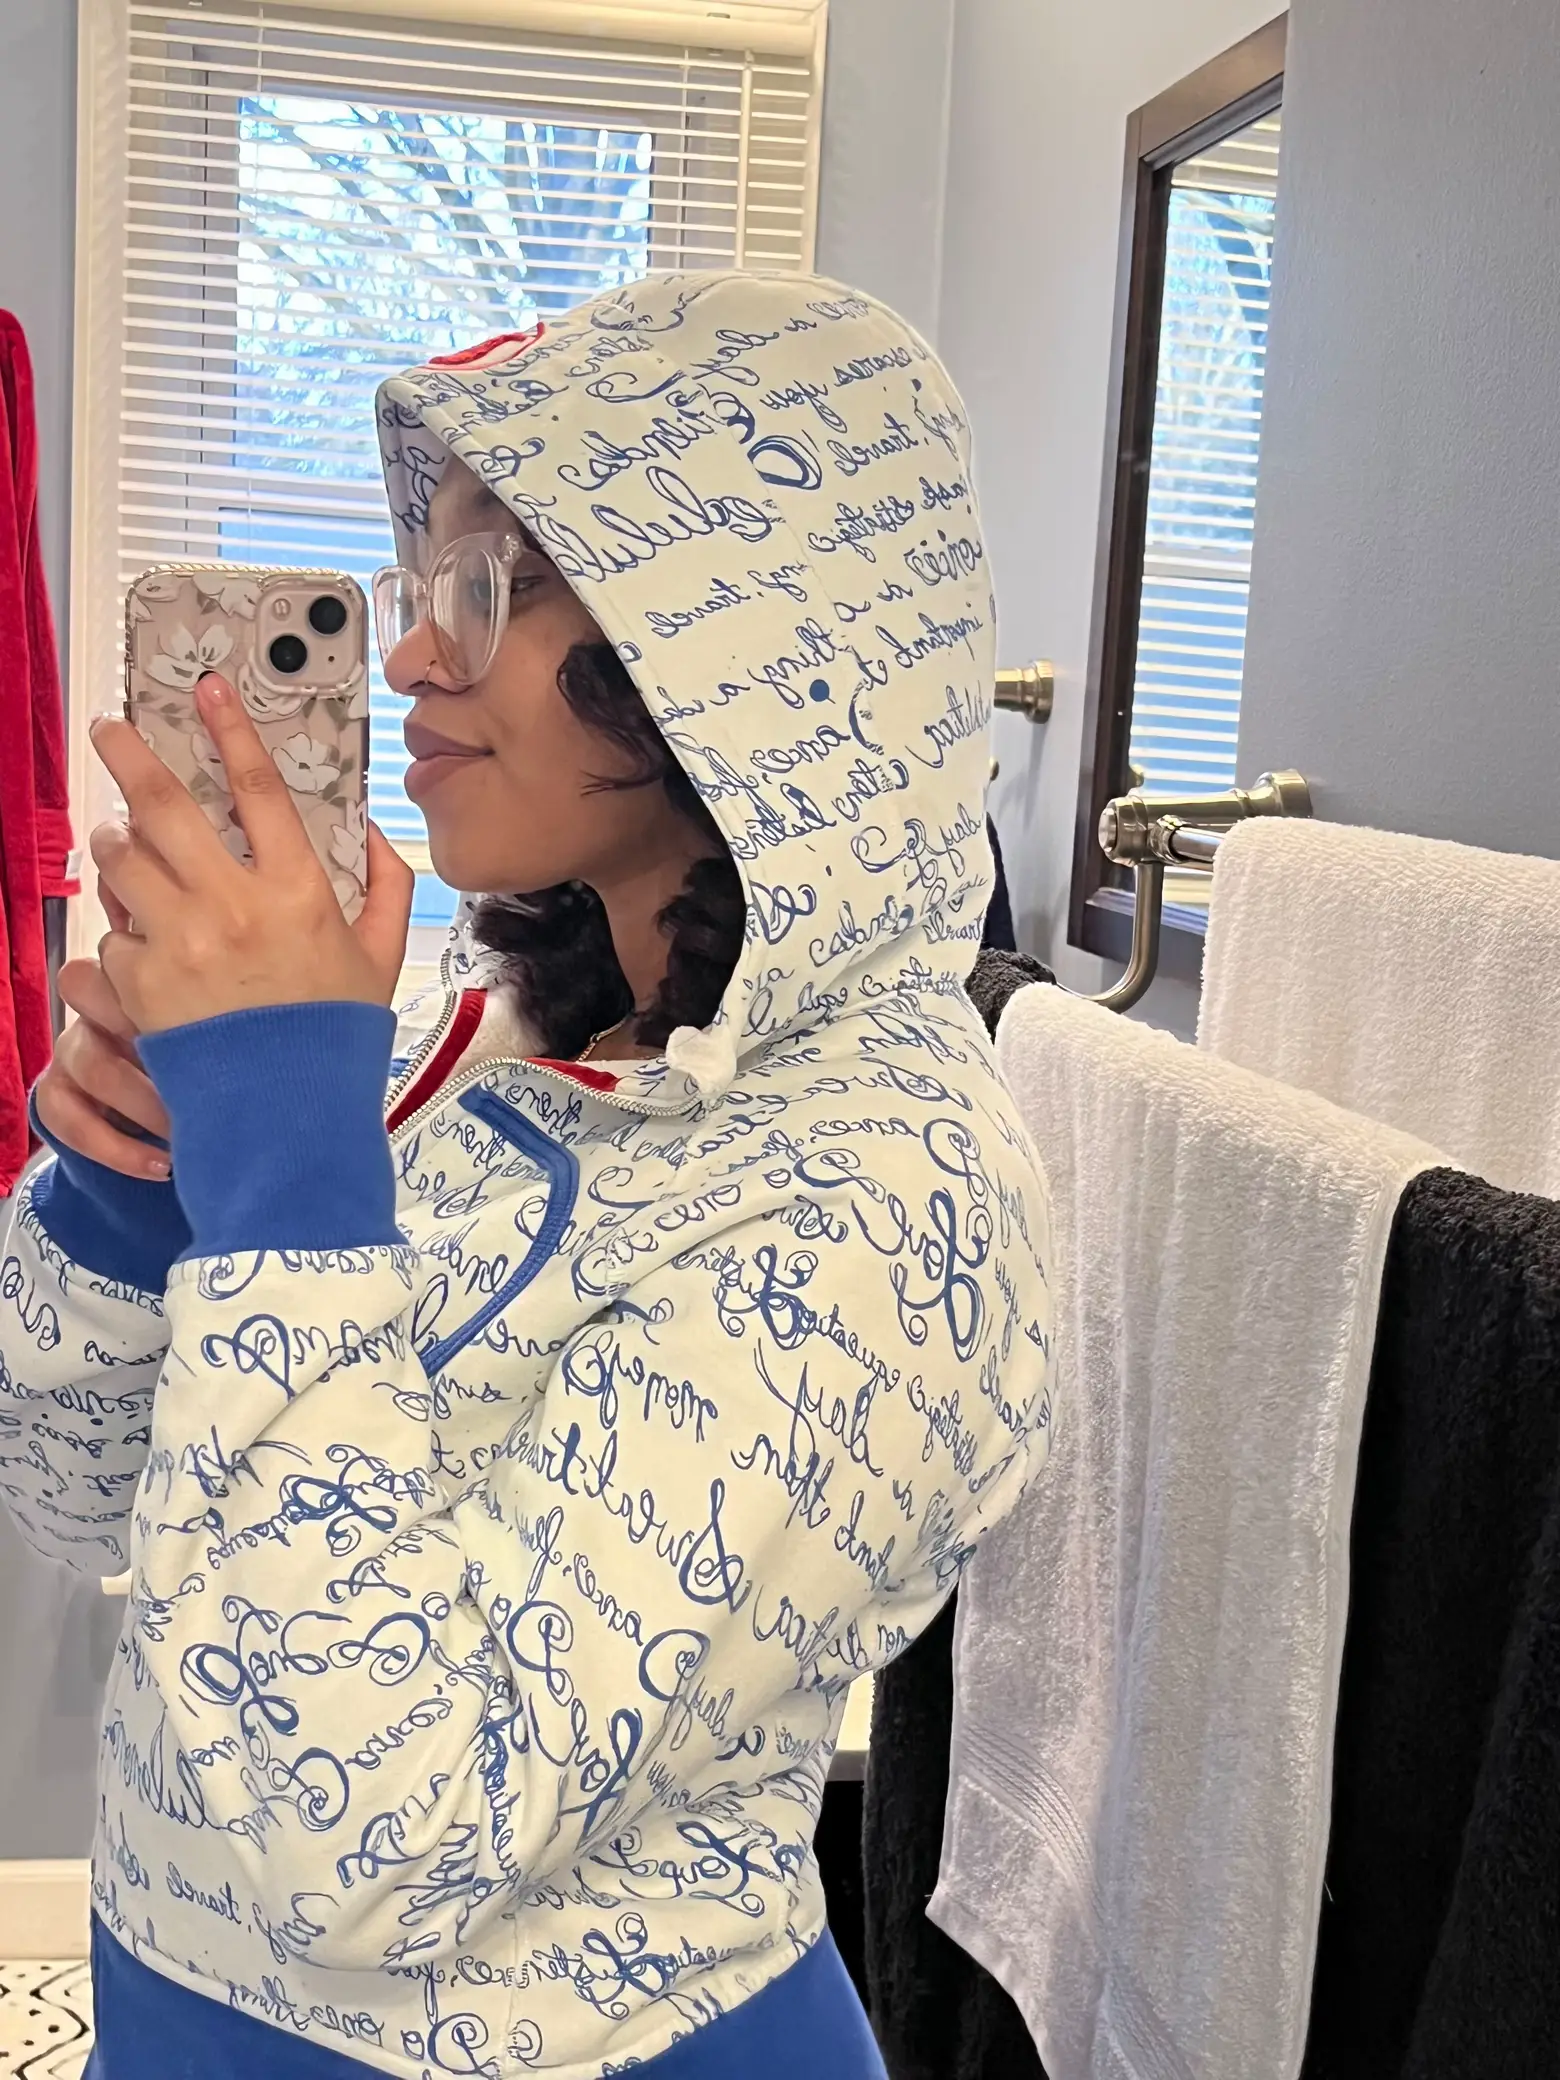 Lululemon scuba hoodie dupe @TJ Maxx!, Gallery posted by Mandy